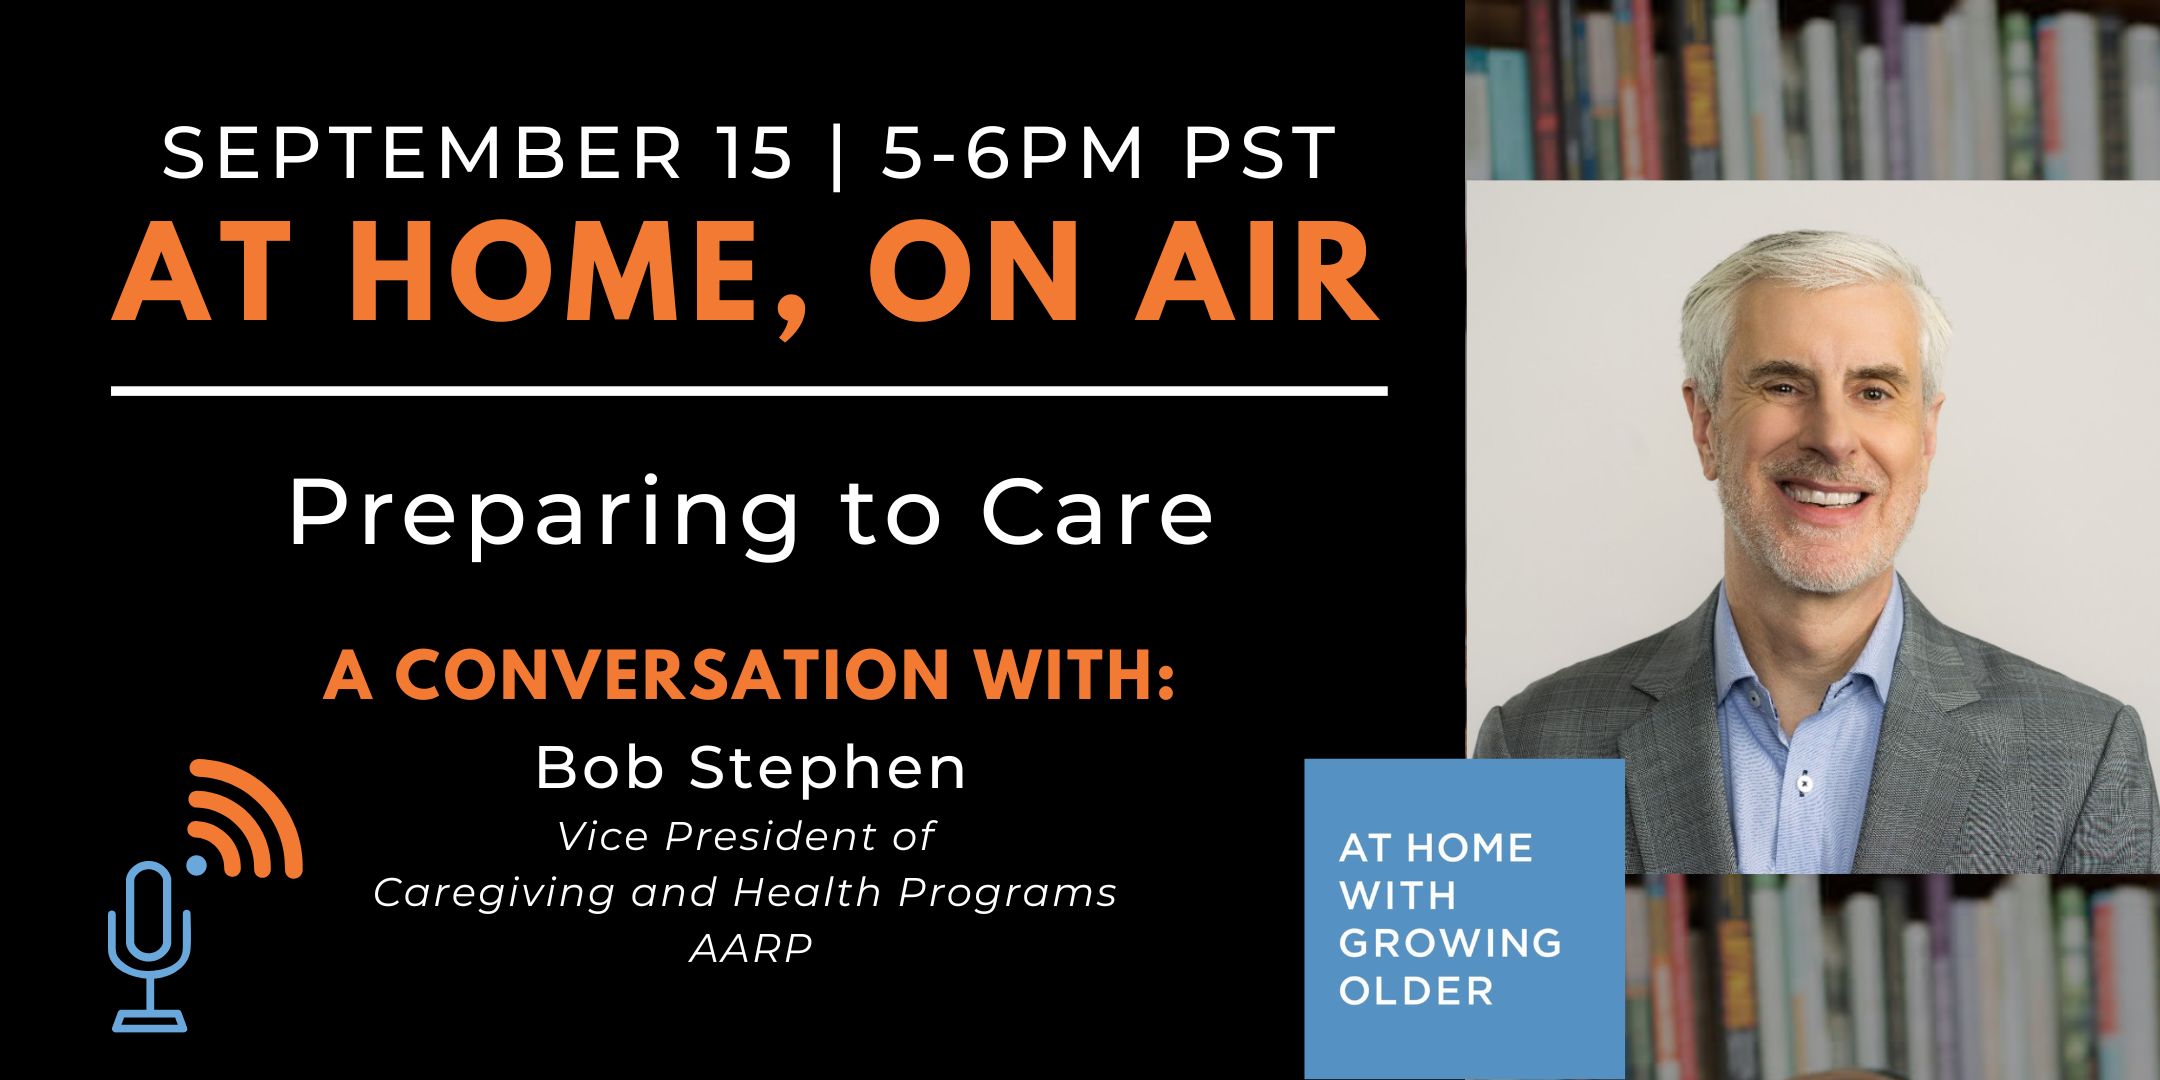 At Home, On Air: A Conversation with Bob Stephen